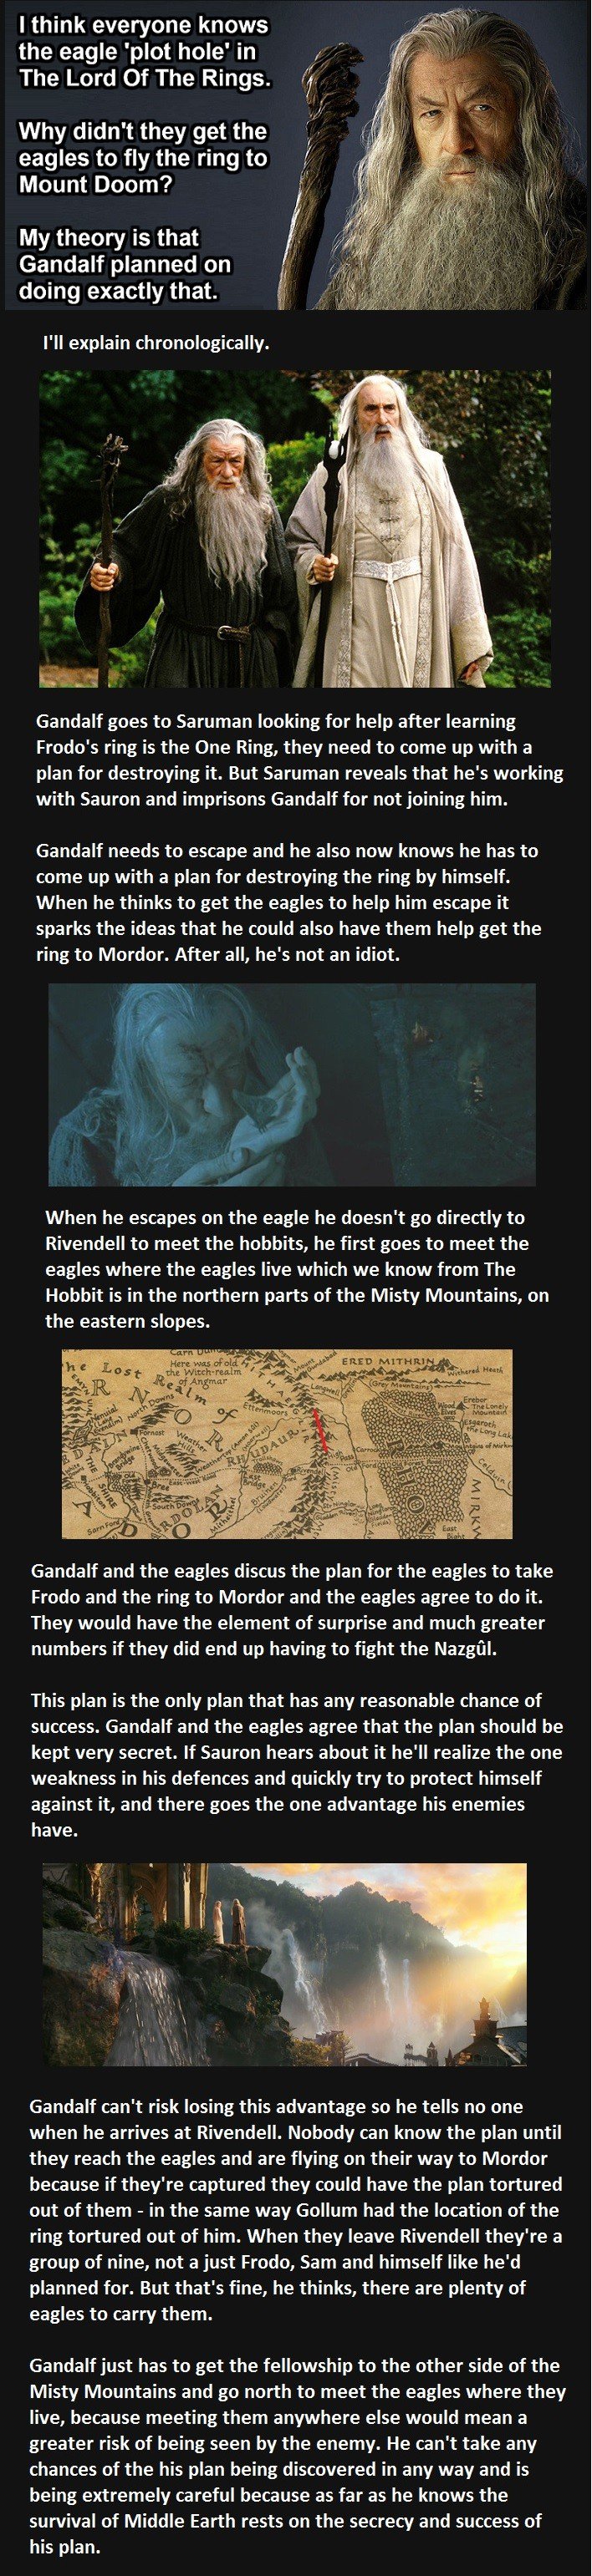 Lord of the Rings Eagle Plot Hole Theory